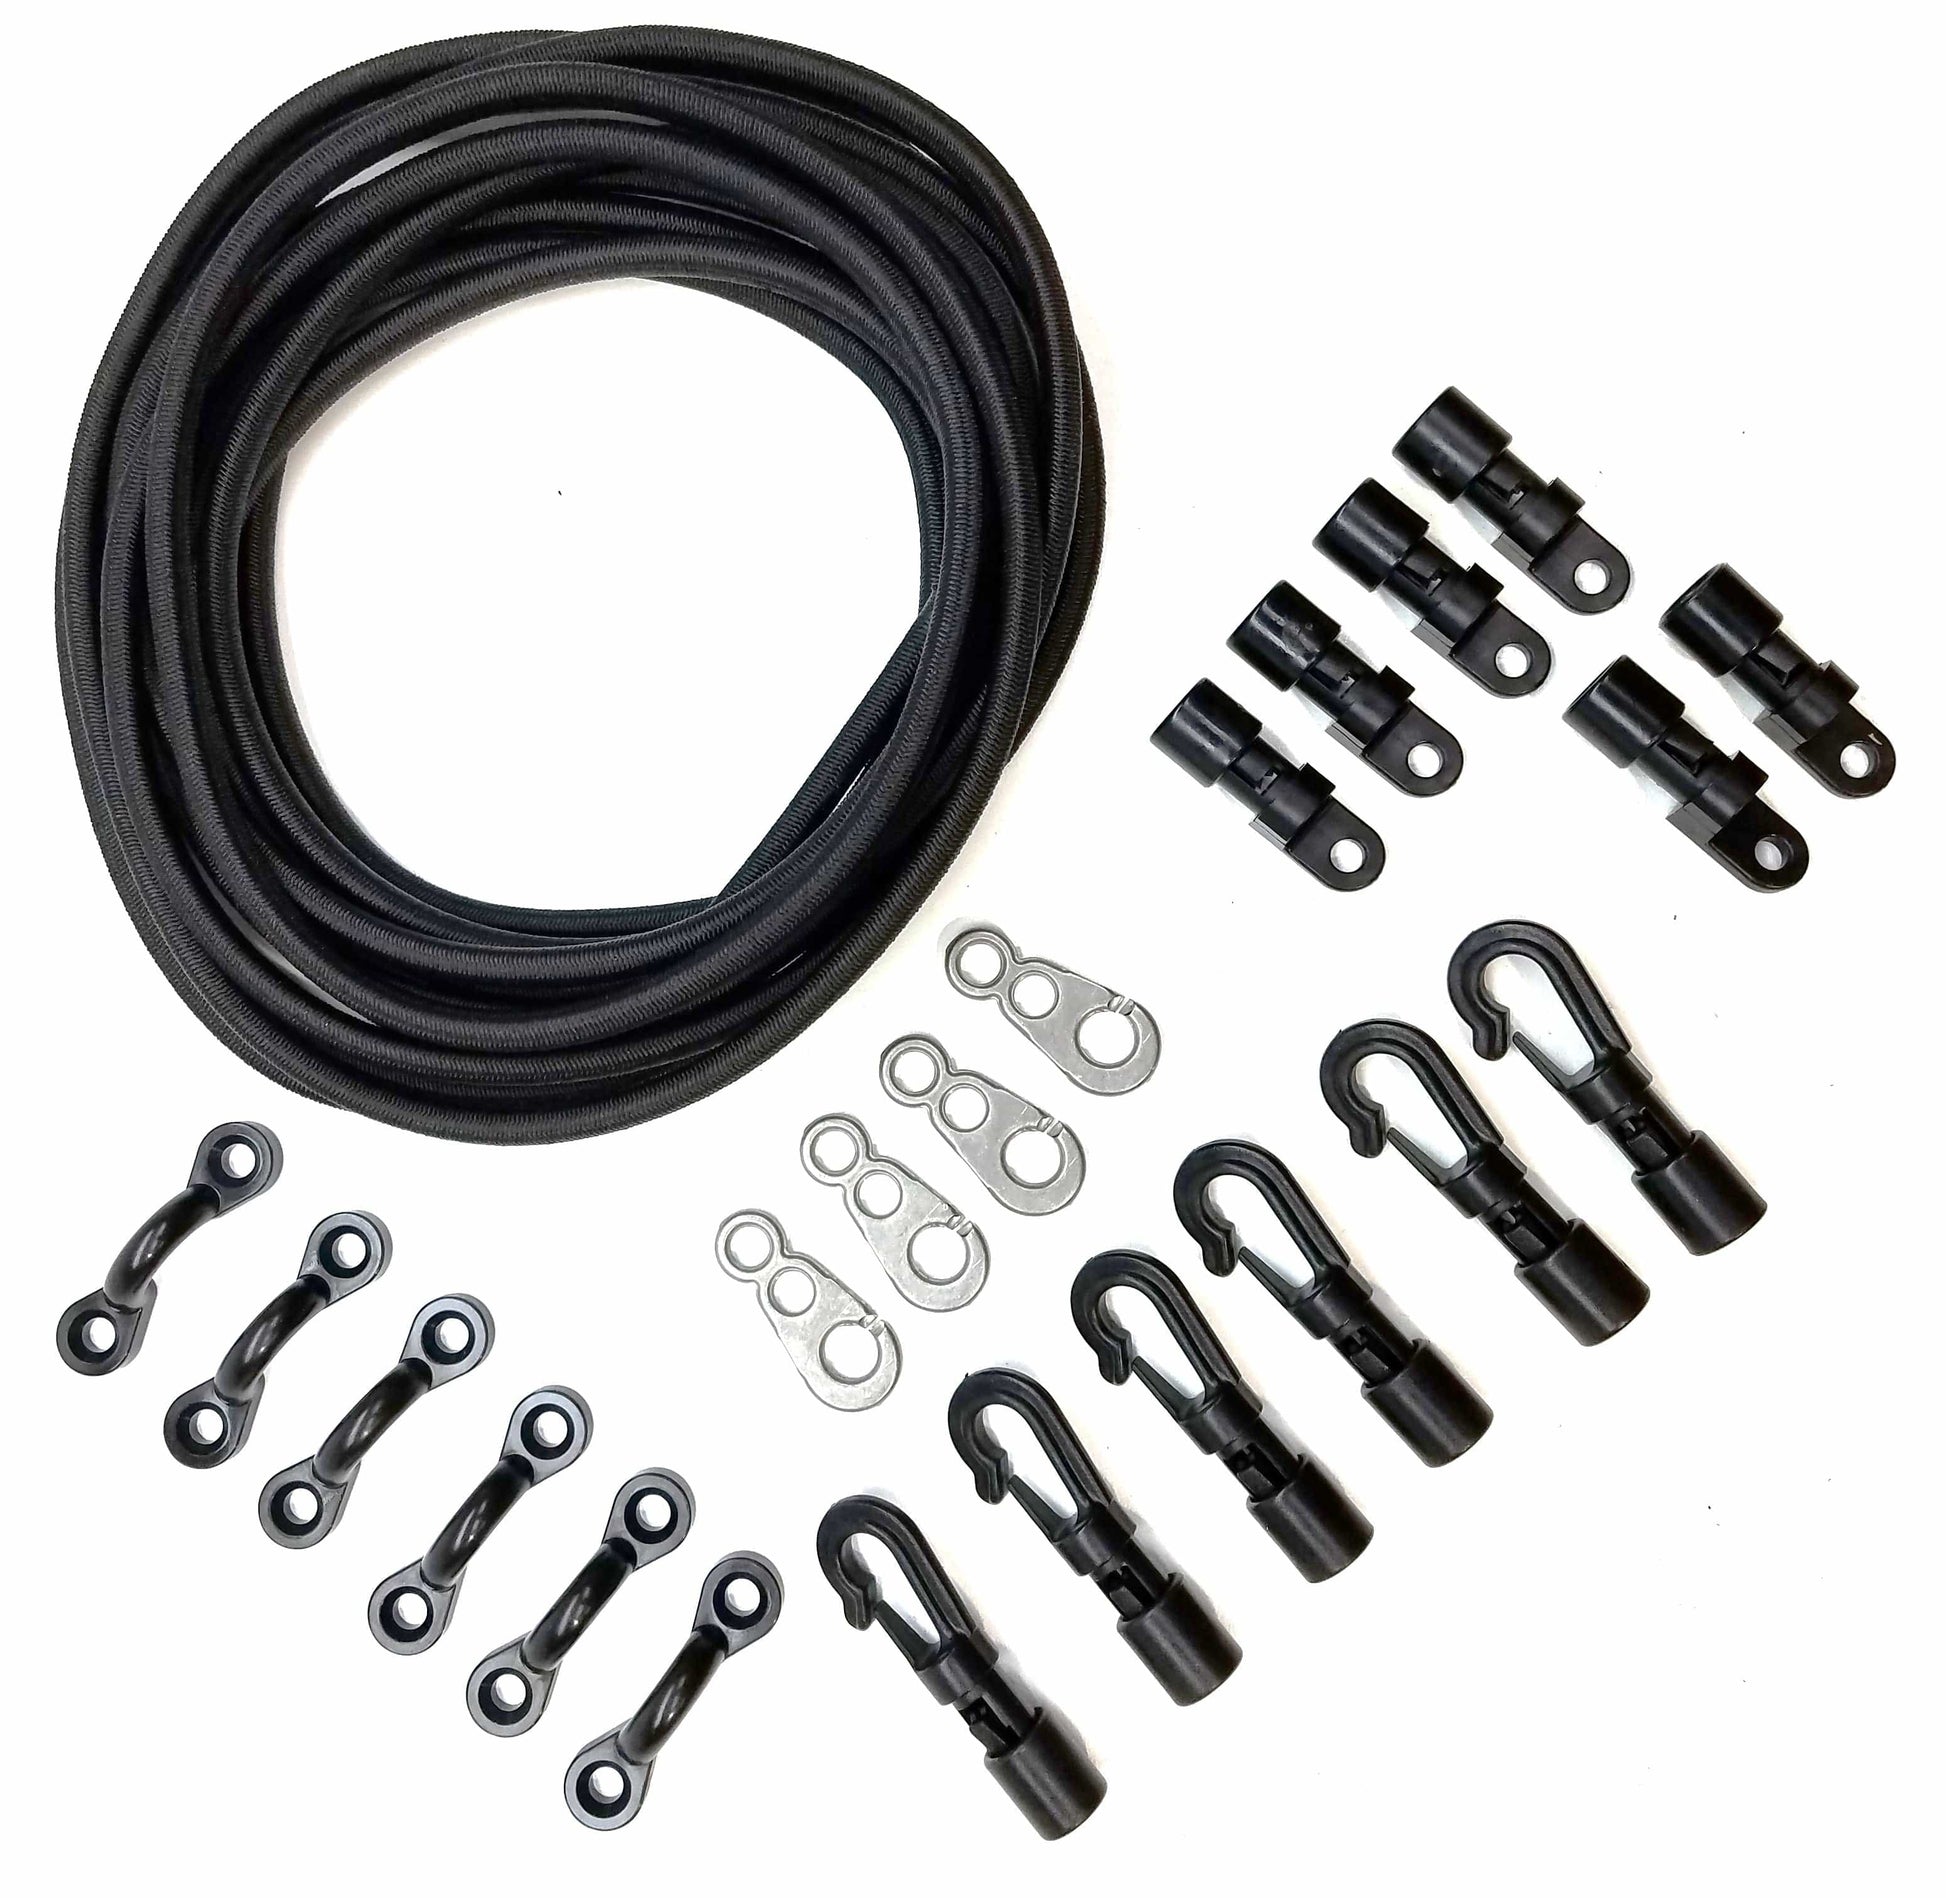 Kayak or SUP Bungee Cord, Pad Eye, Hooks, Terminal Ends and Brummel Hook  Deck Kit. Create easy tie down solutions on you Kayak, SUP and other  personal